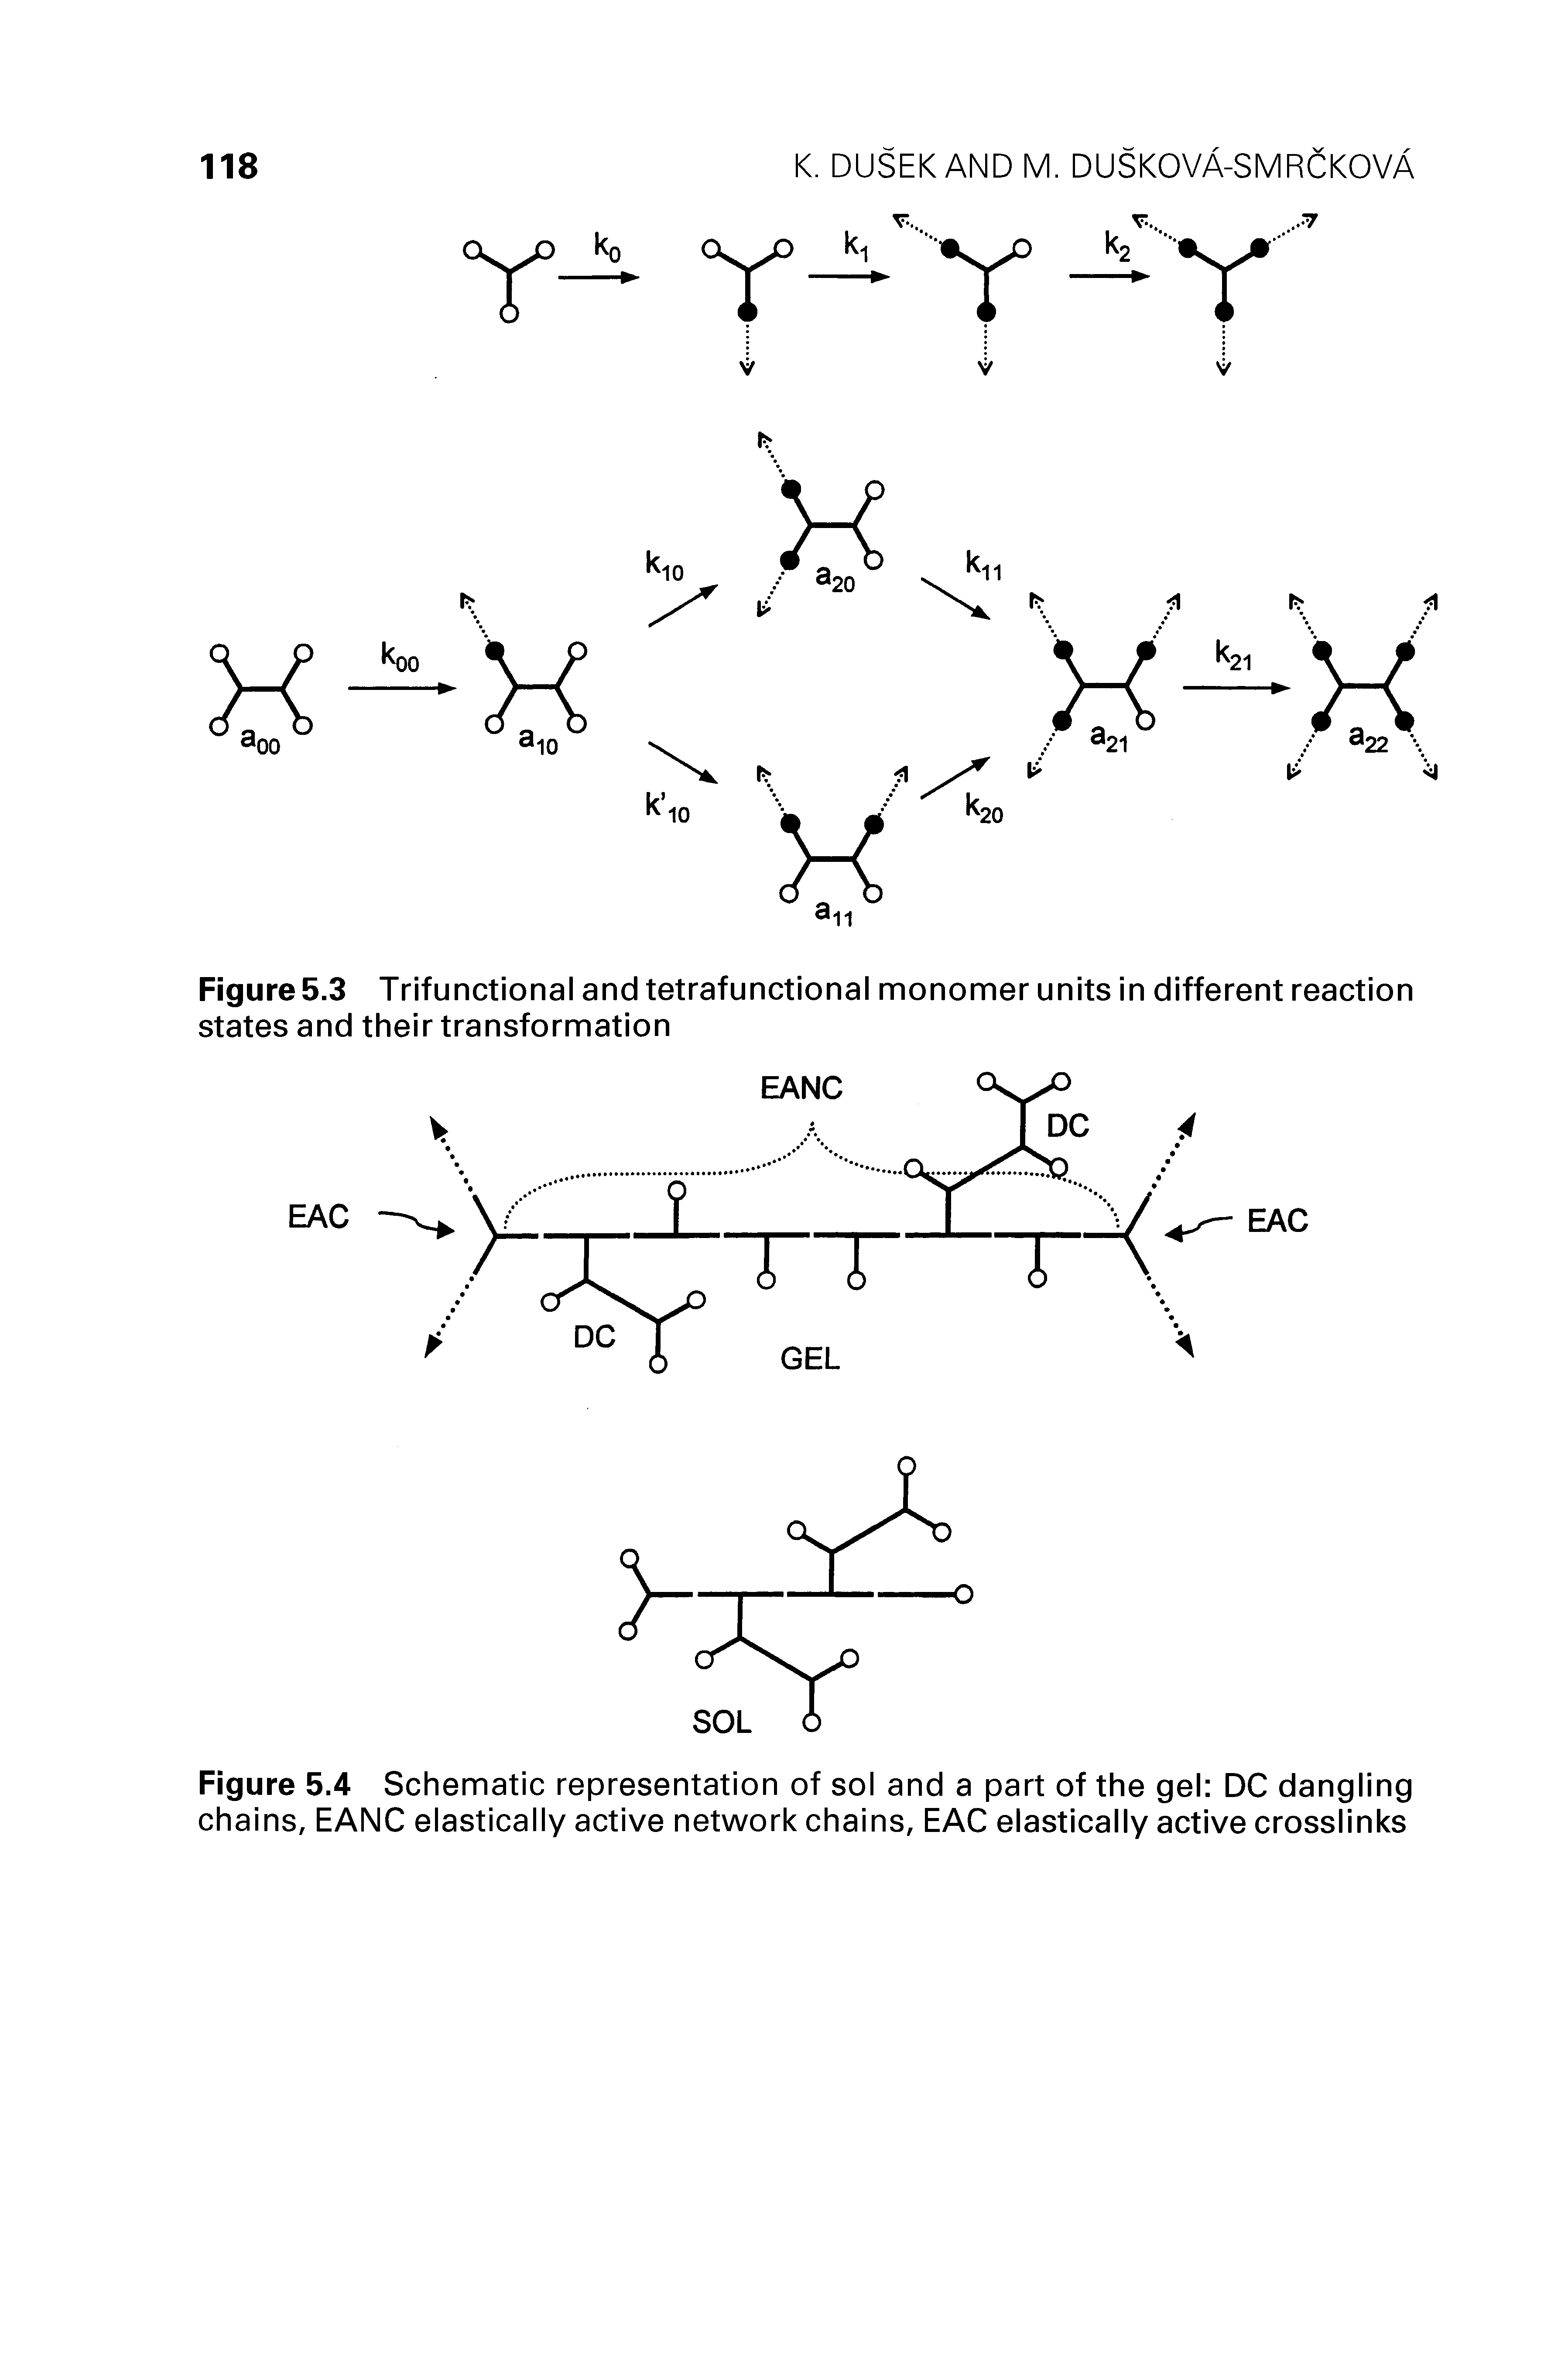 Figure 5.3 Trifunctional and tetrafunctional monomer units in different reaction states and their transformation...